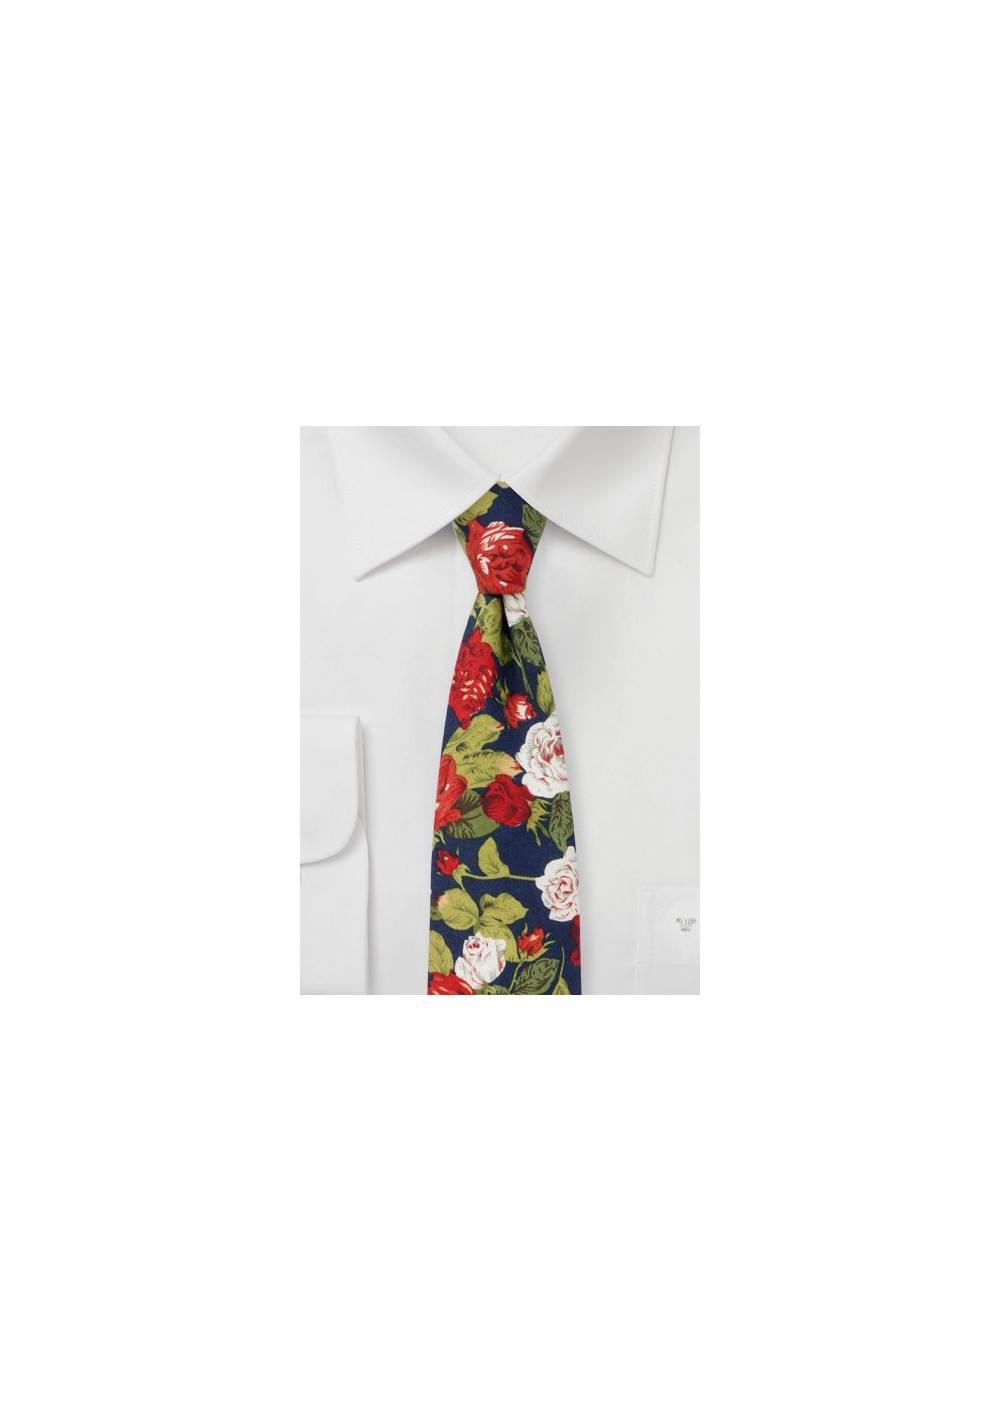 Rose Pattern Tie in Navy, Red, White, and Green